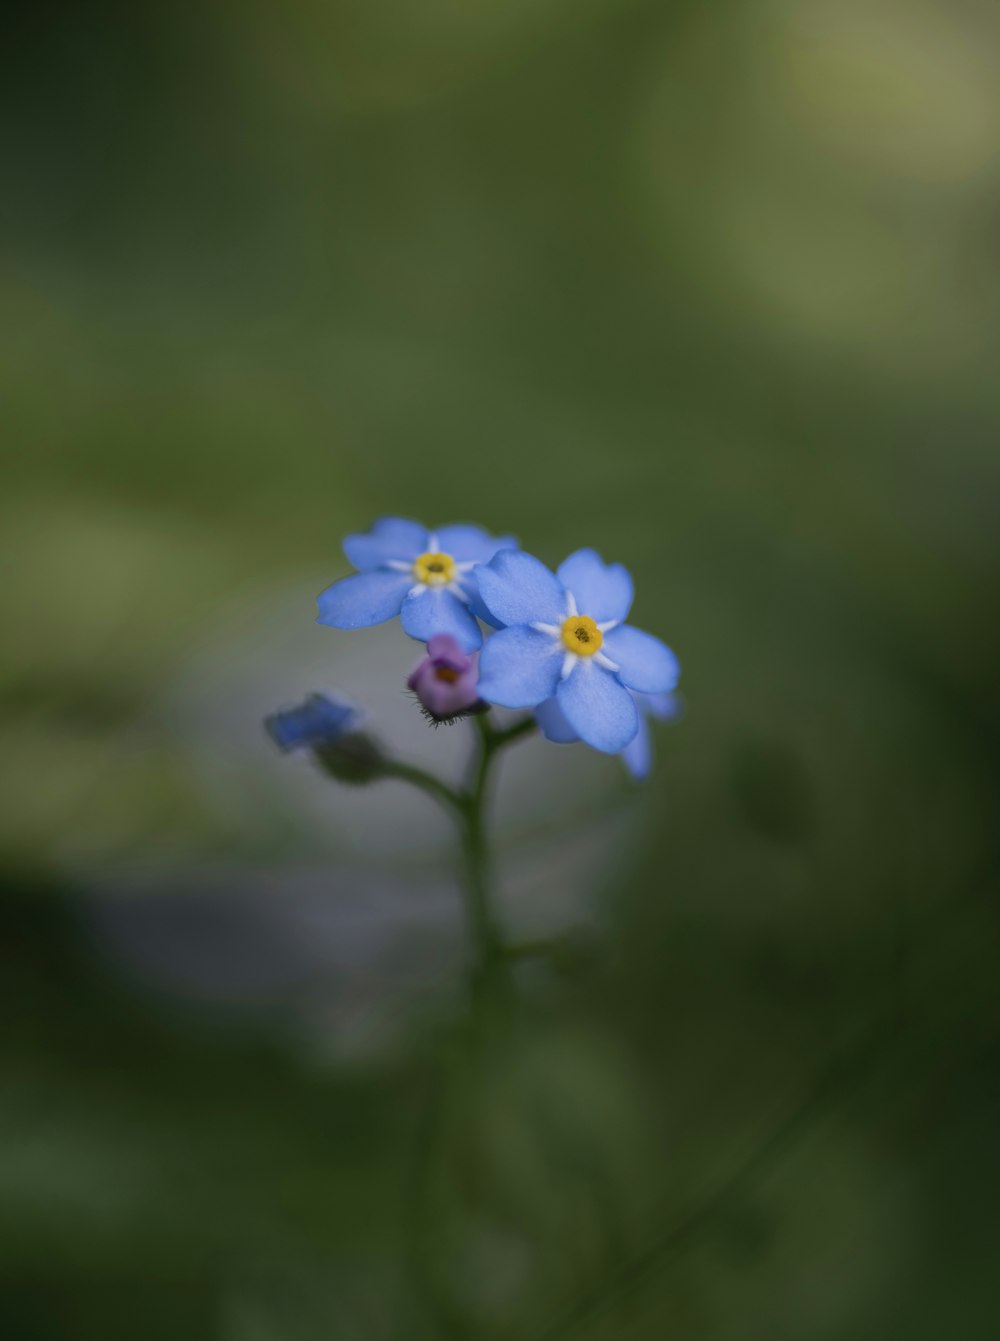 a small blue flower with a yellow center